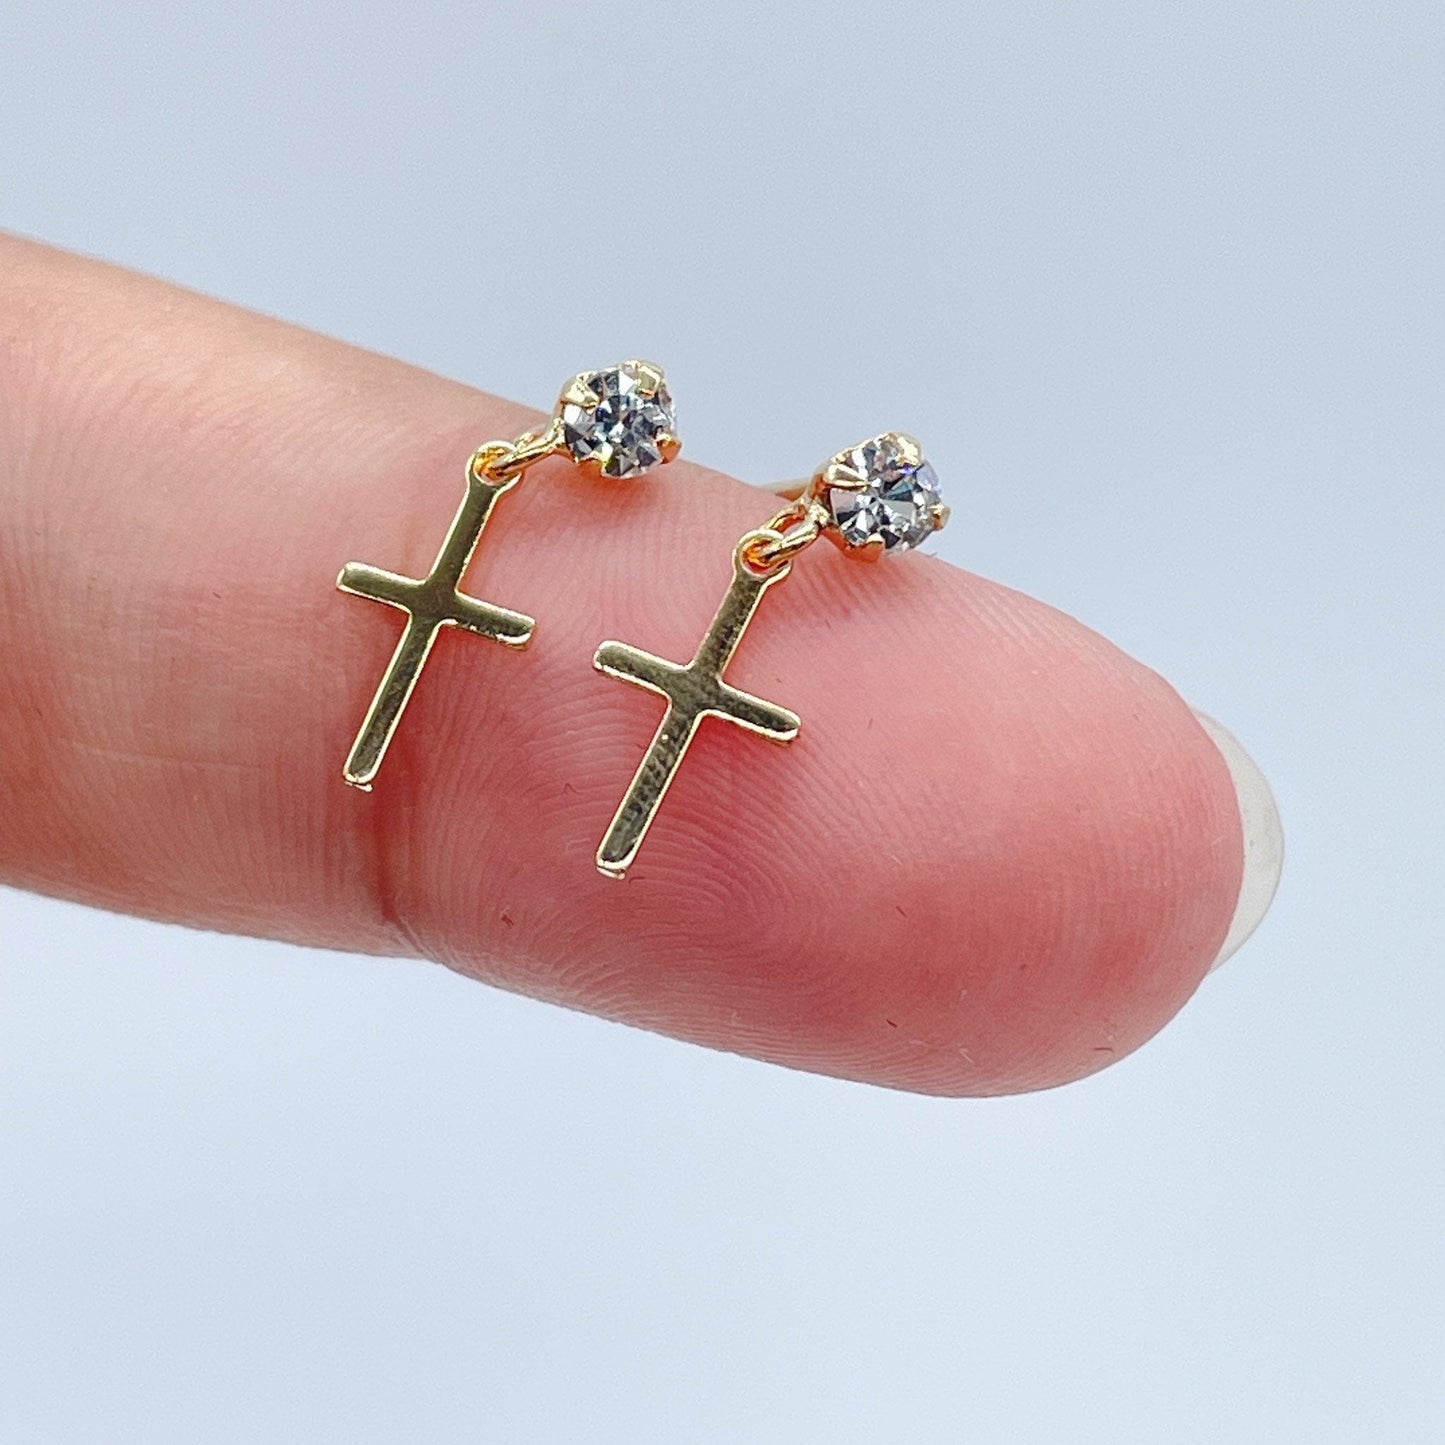 18k Gold Layered Tiny Hanging Cross with Cubic Zirconia Stud Earrings Wholesale